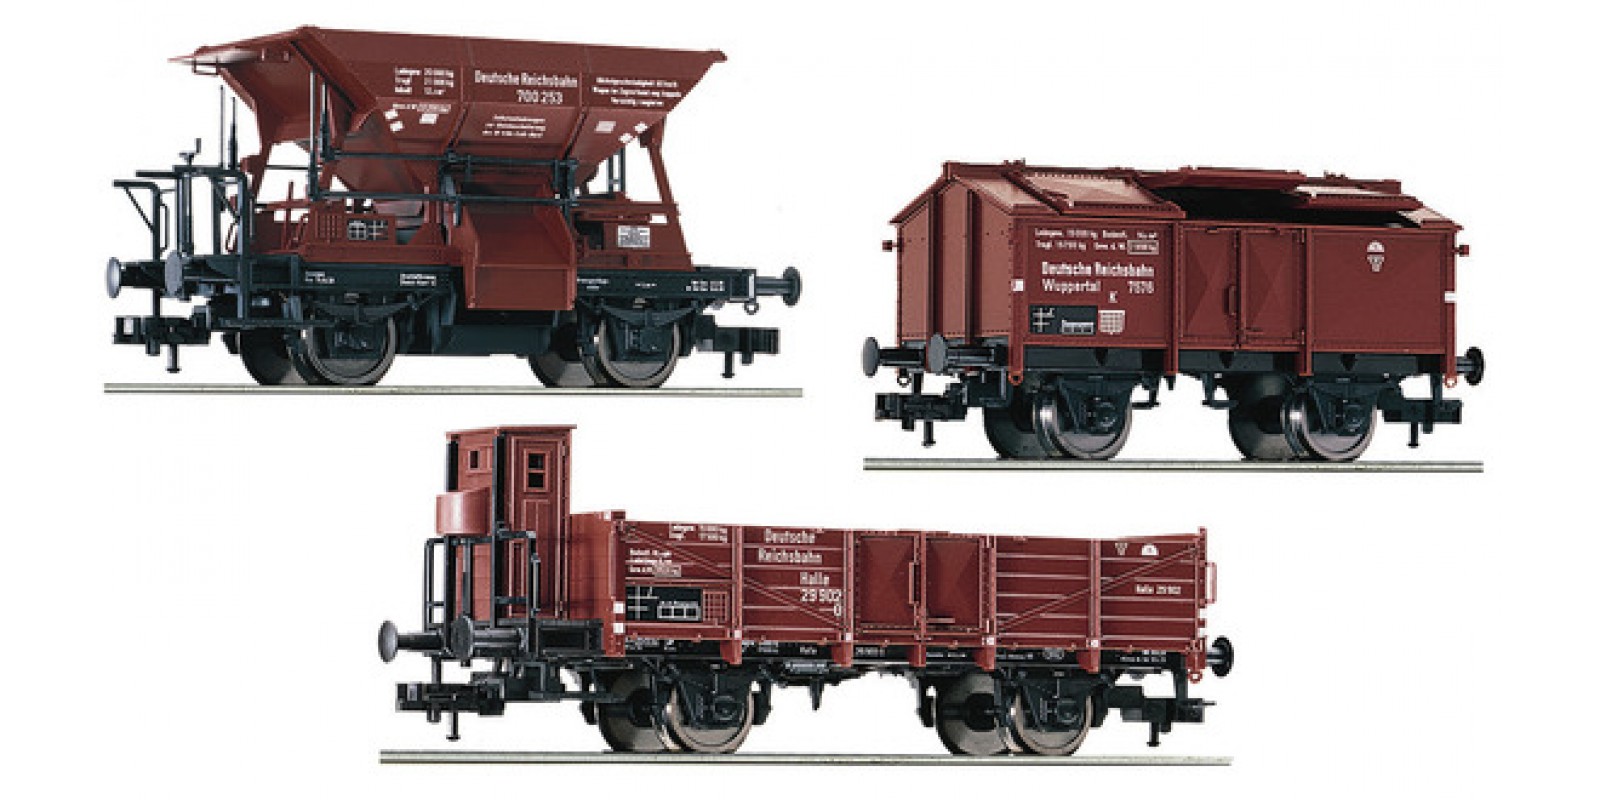 FL550504 - 3 piece set: goods wagons that matches the E 69 05 (item number 430002), DRB